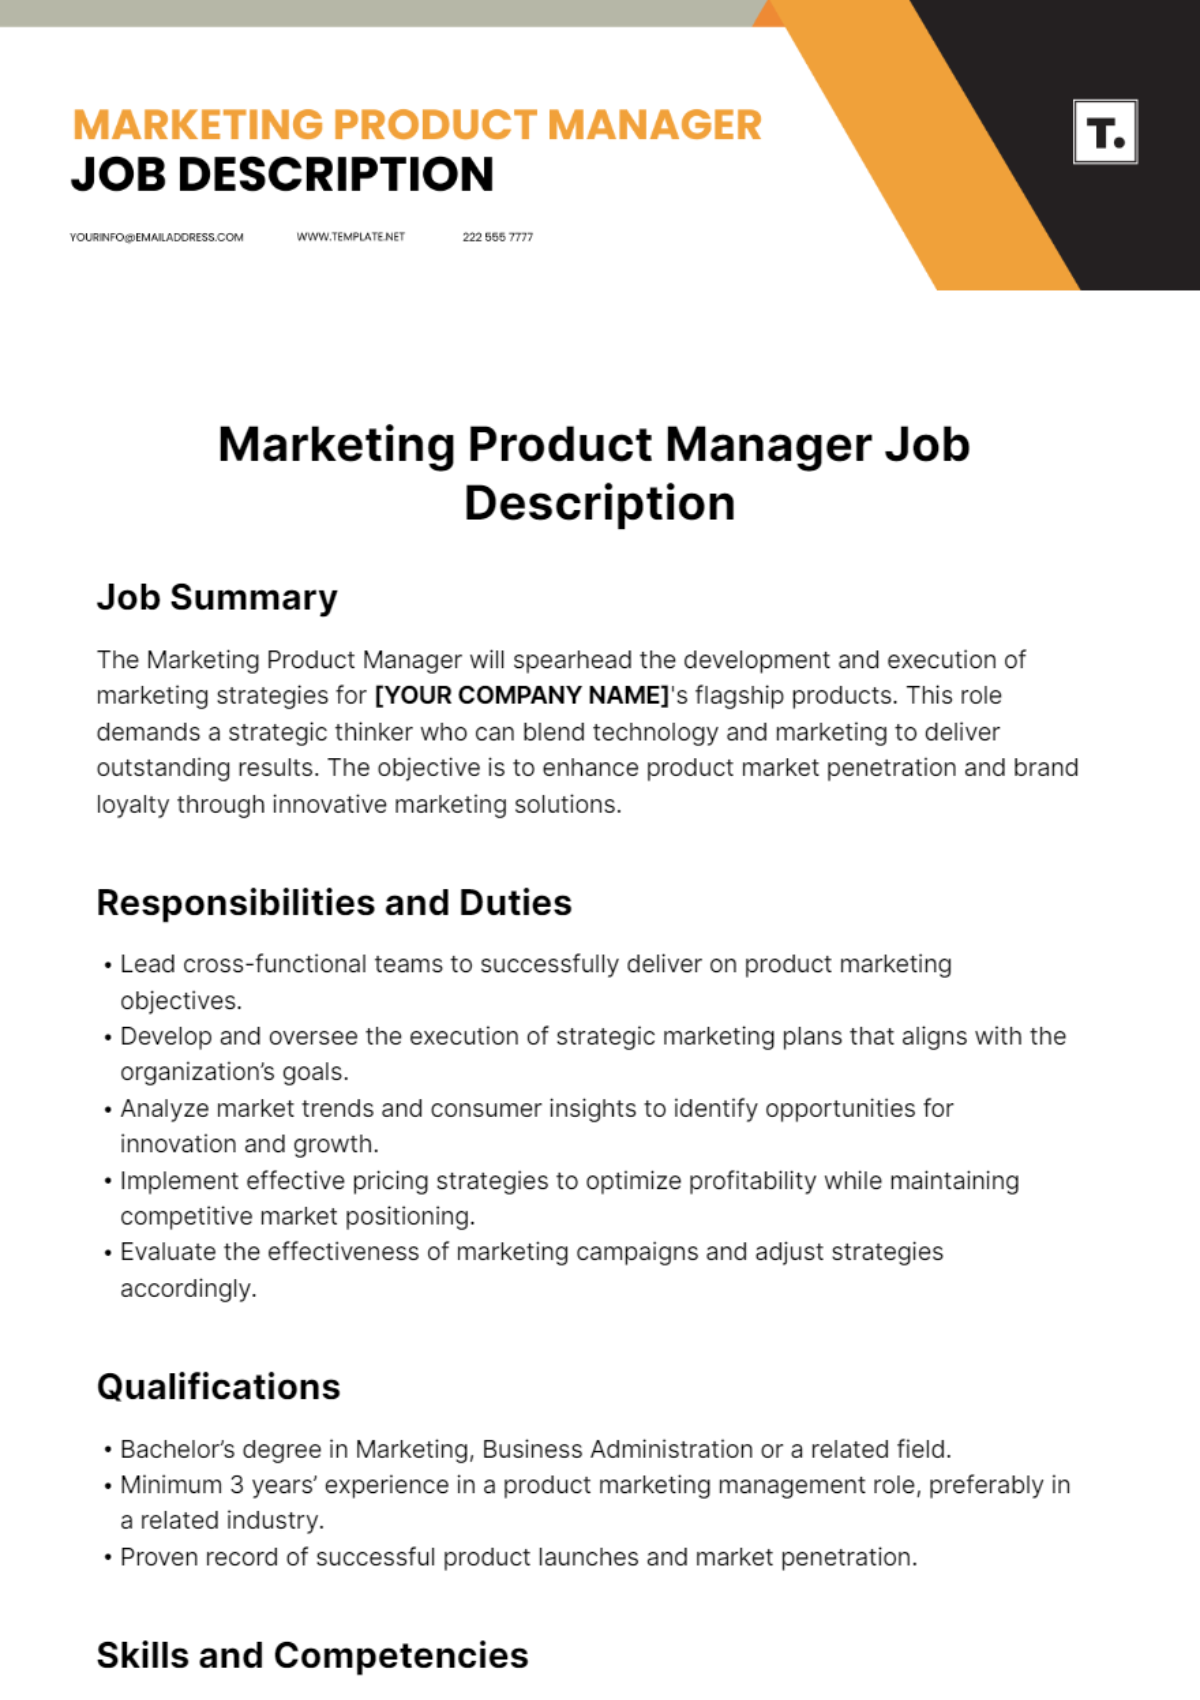 Free Marketing Product Manager Job Description Template